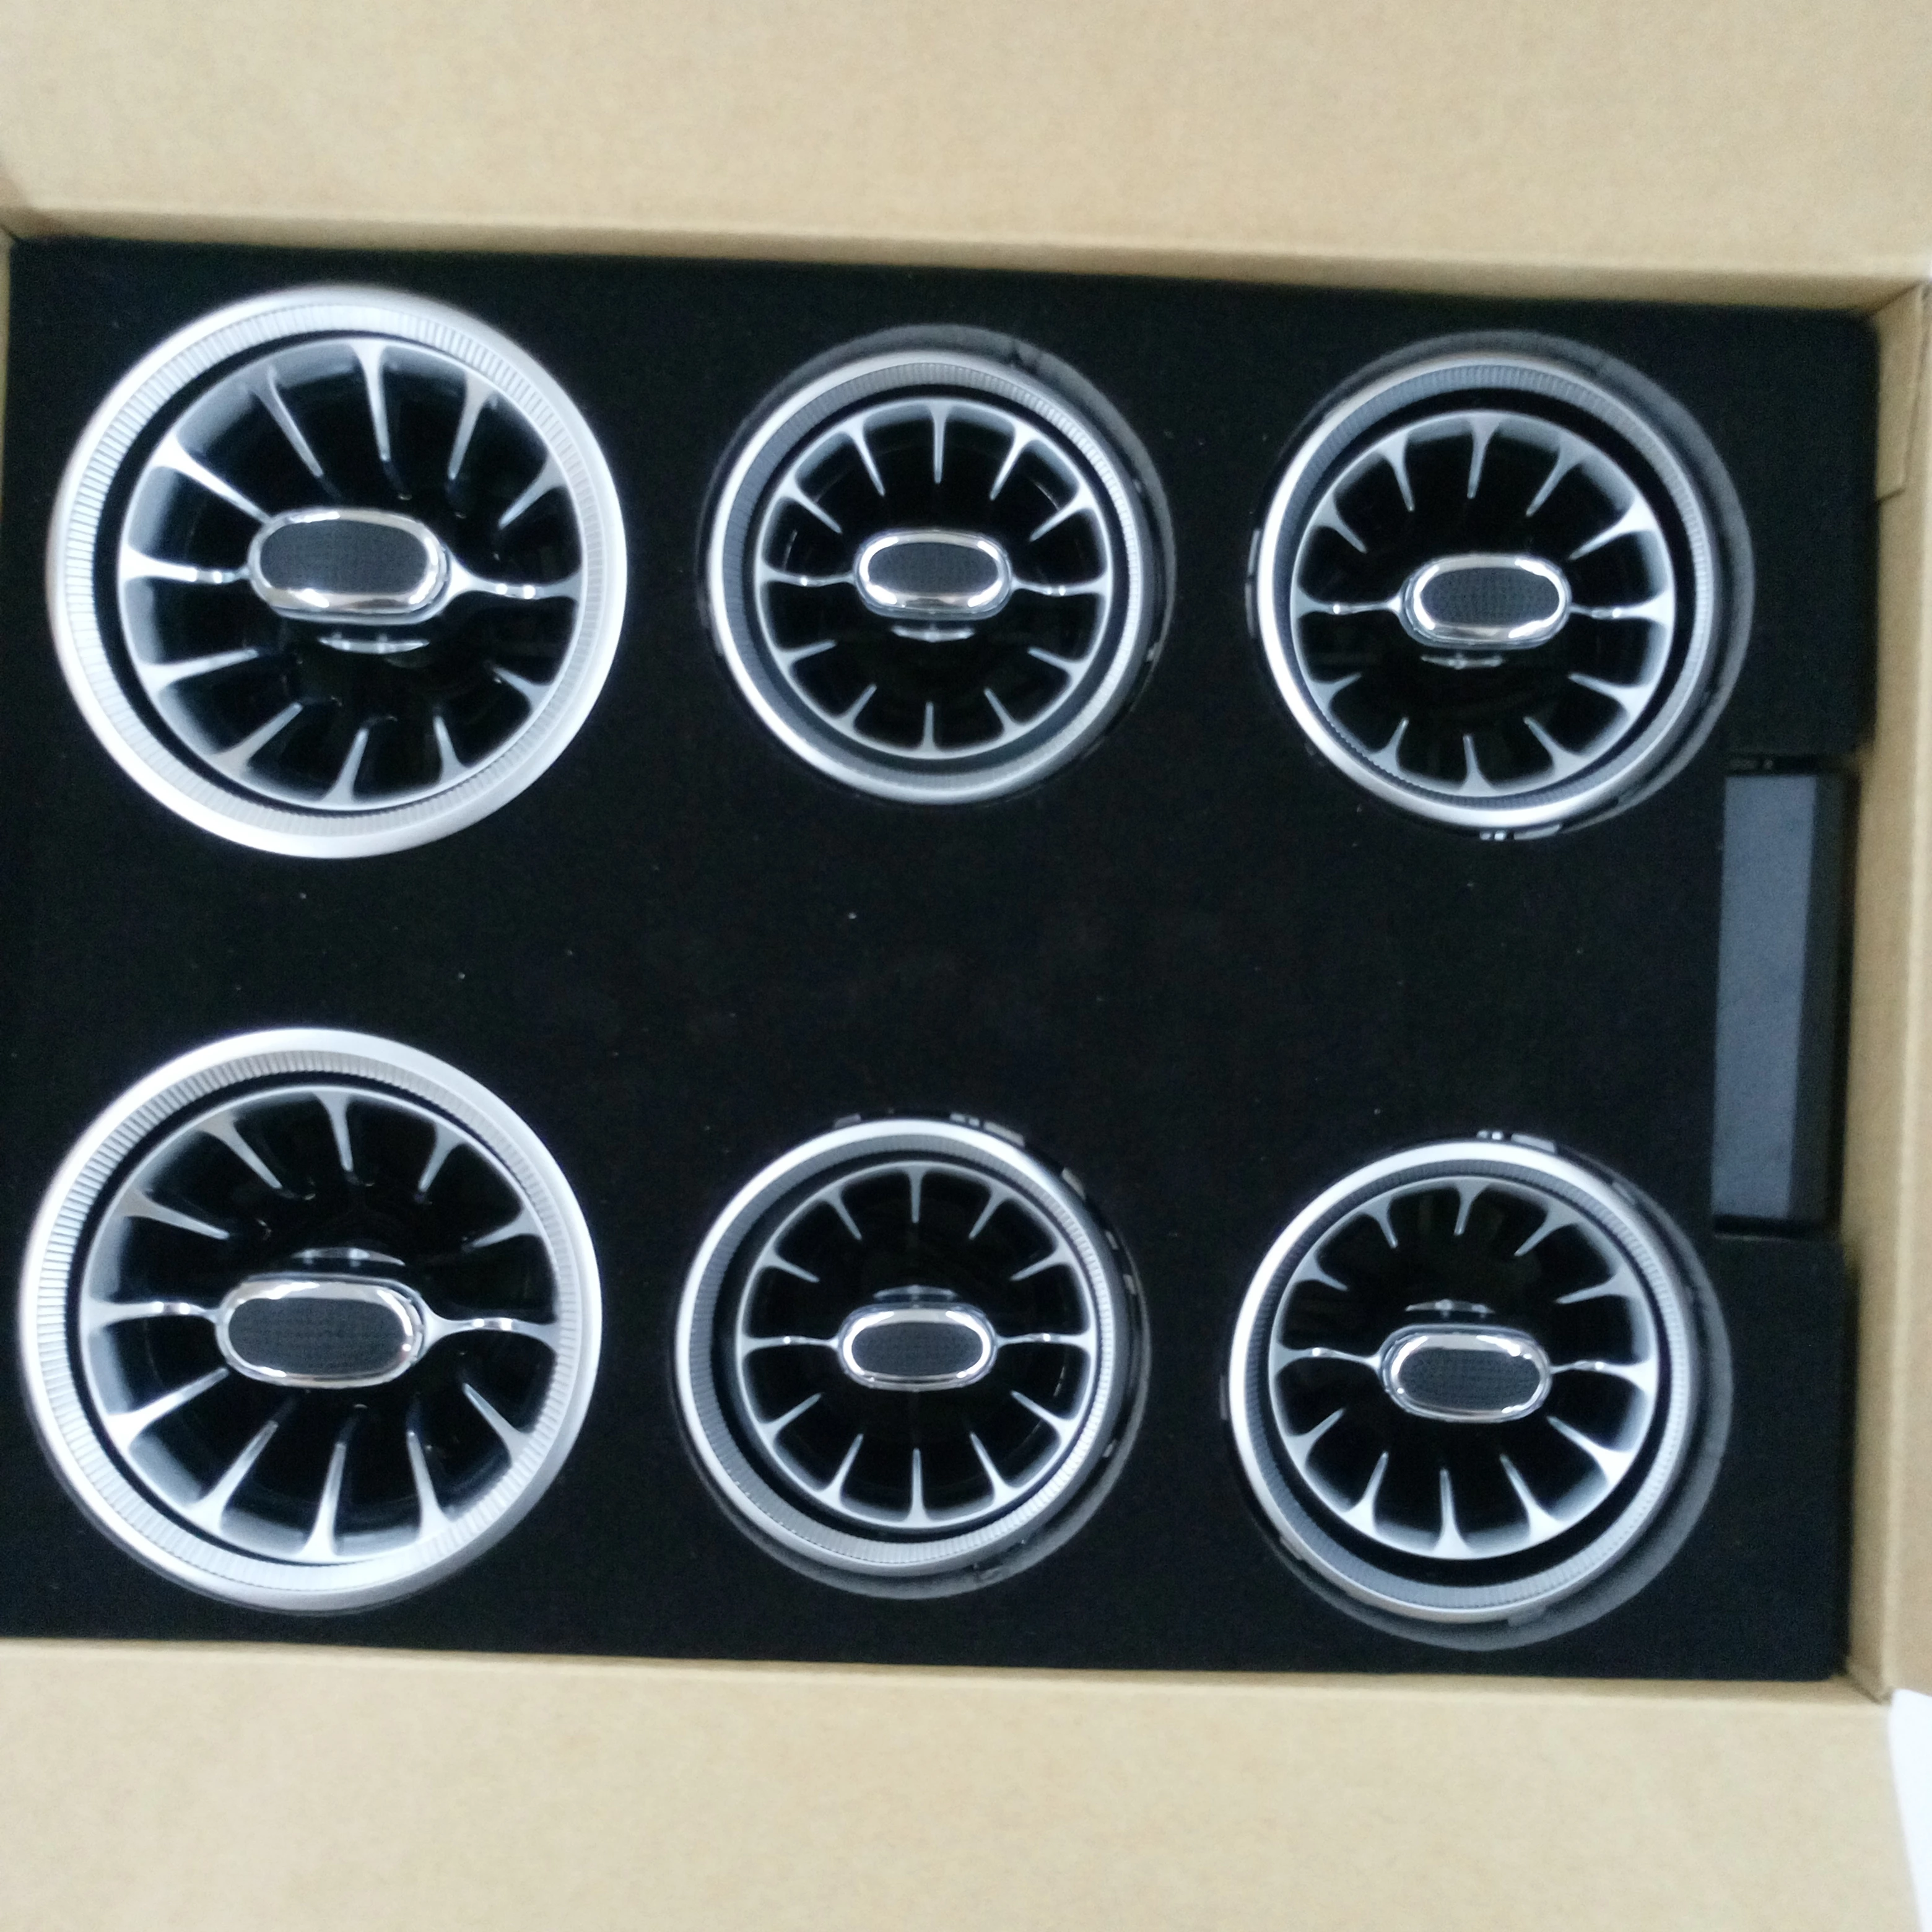 Automotive Air Vents With Ambient Light for B-e-n-z E-Class W213